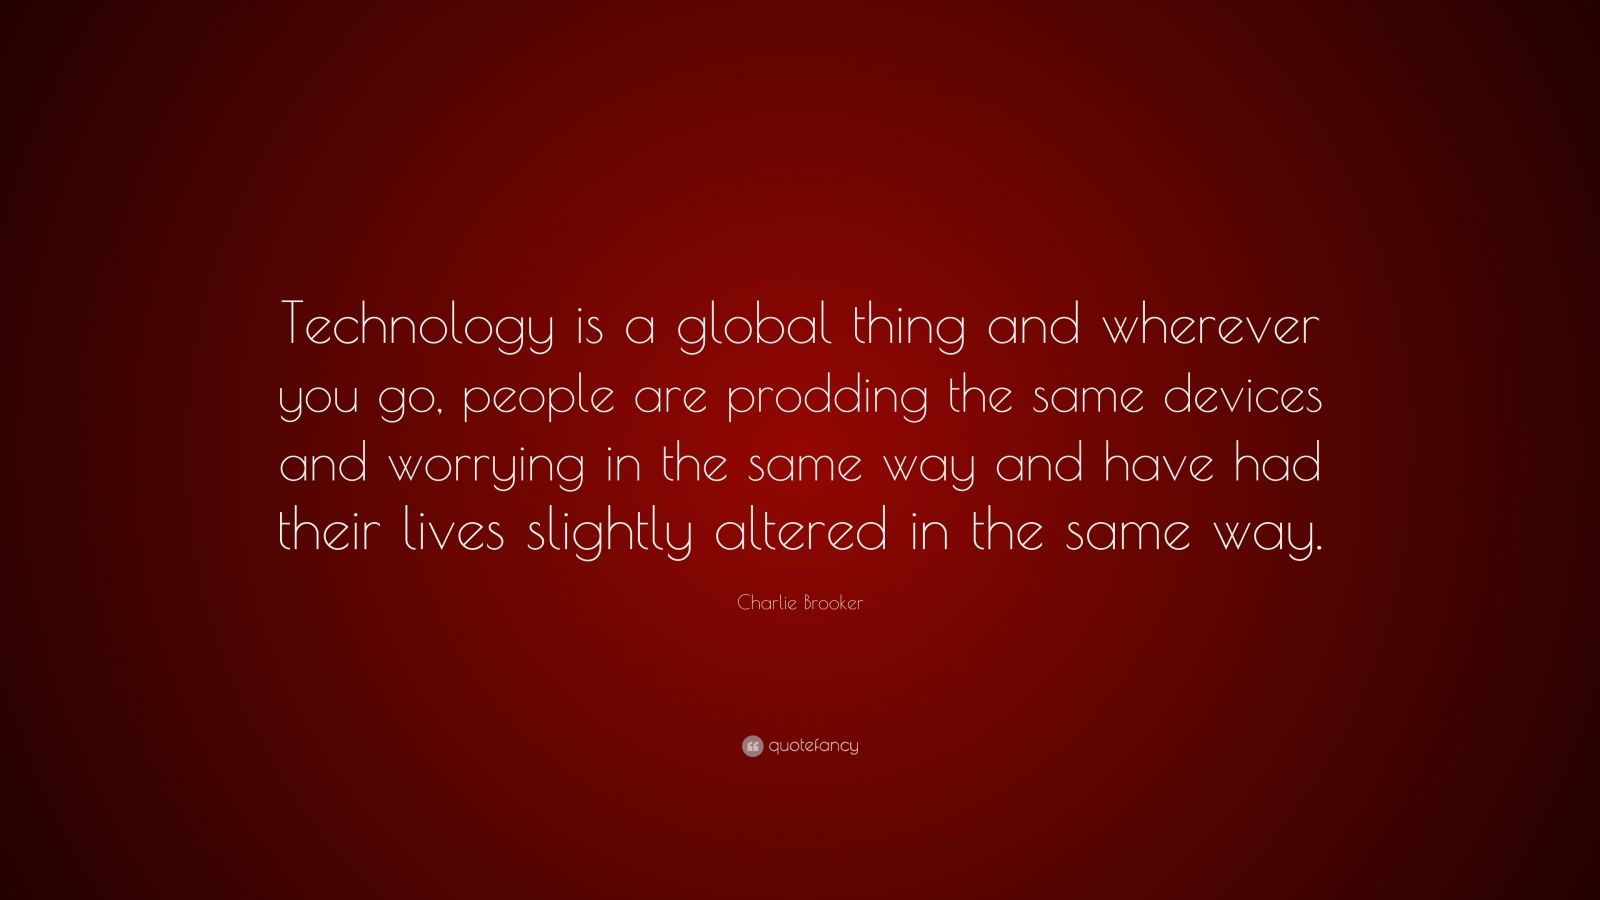 Charlie Brooker Quote: “Technology is a global thing and wherever you ...